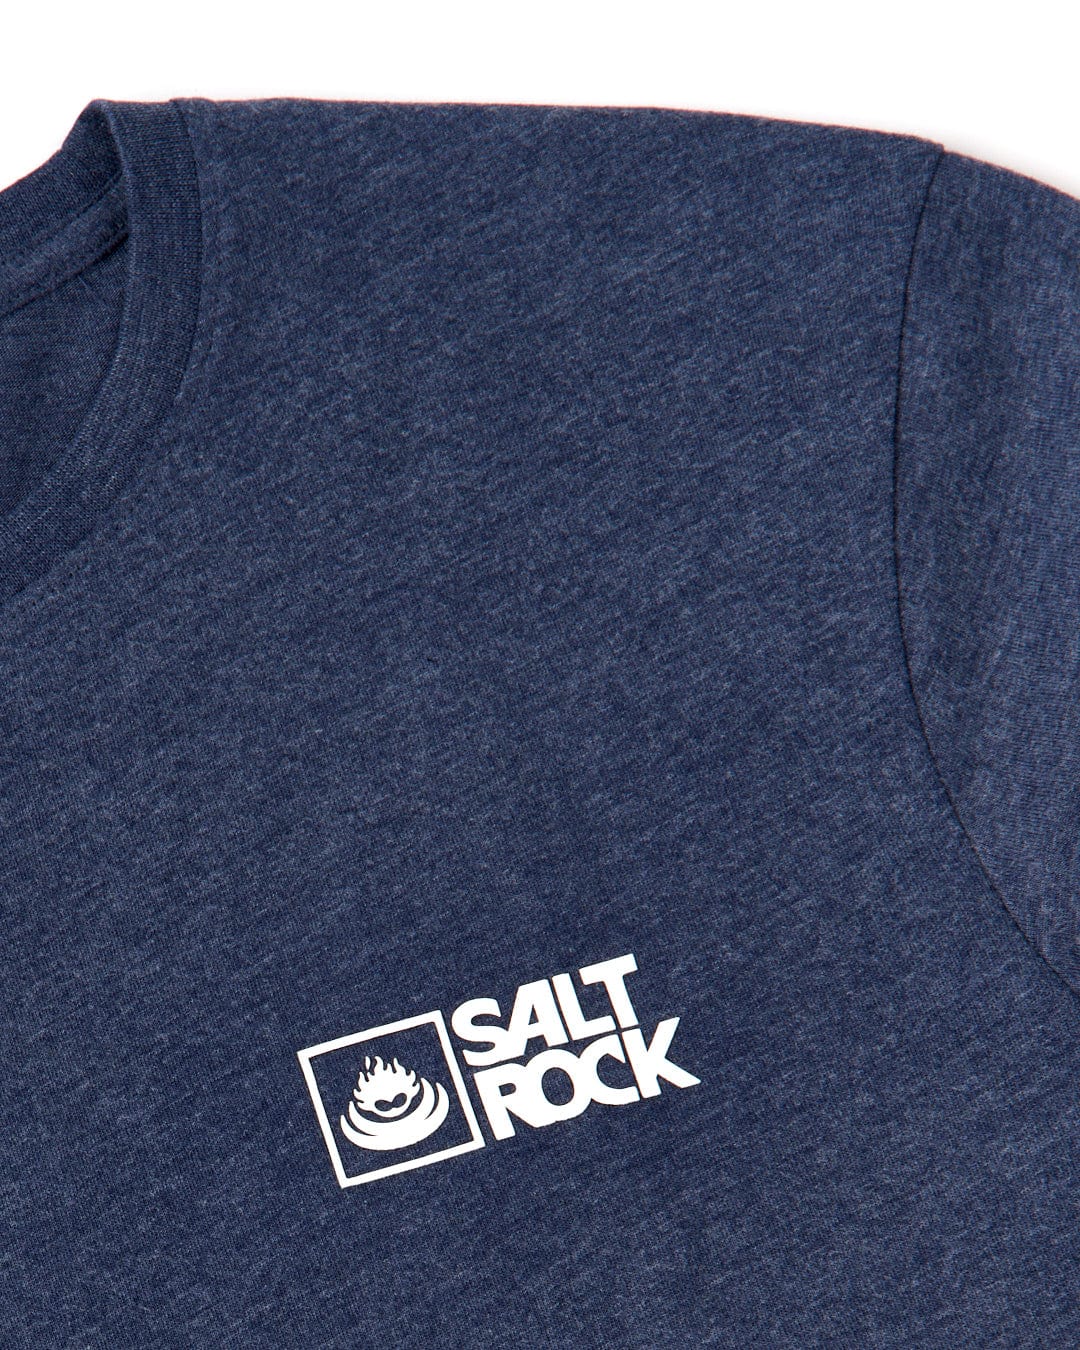 Navy blue marl Saltrock Original t-shirt with a printed logo on the left chest area.